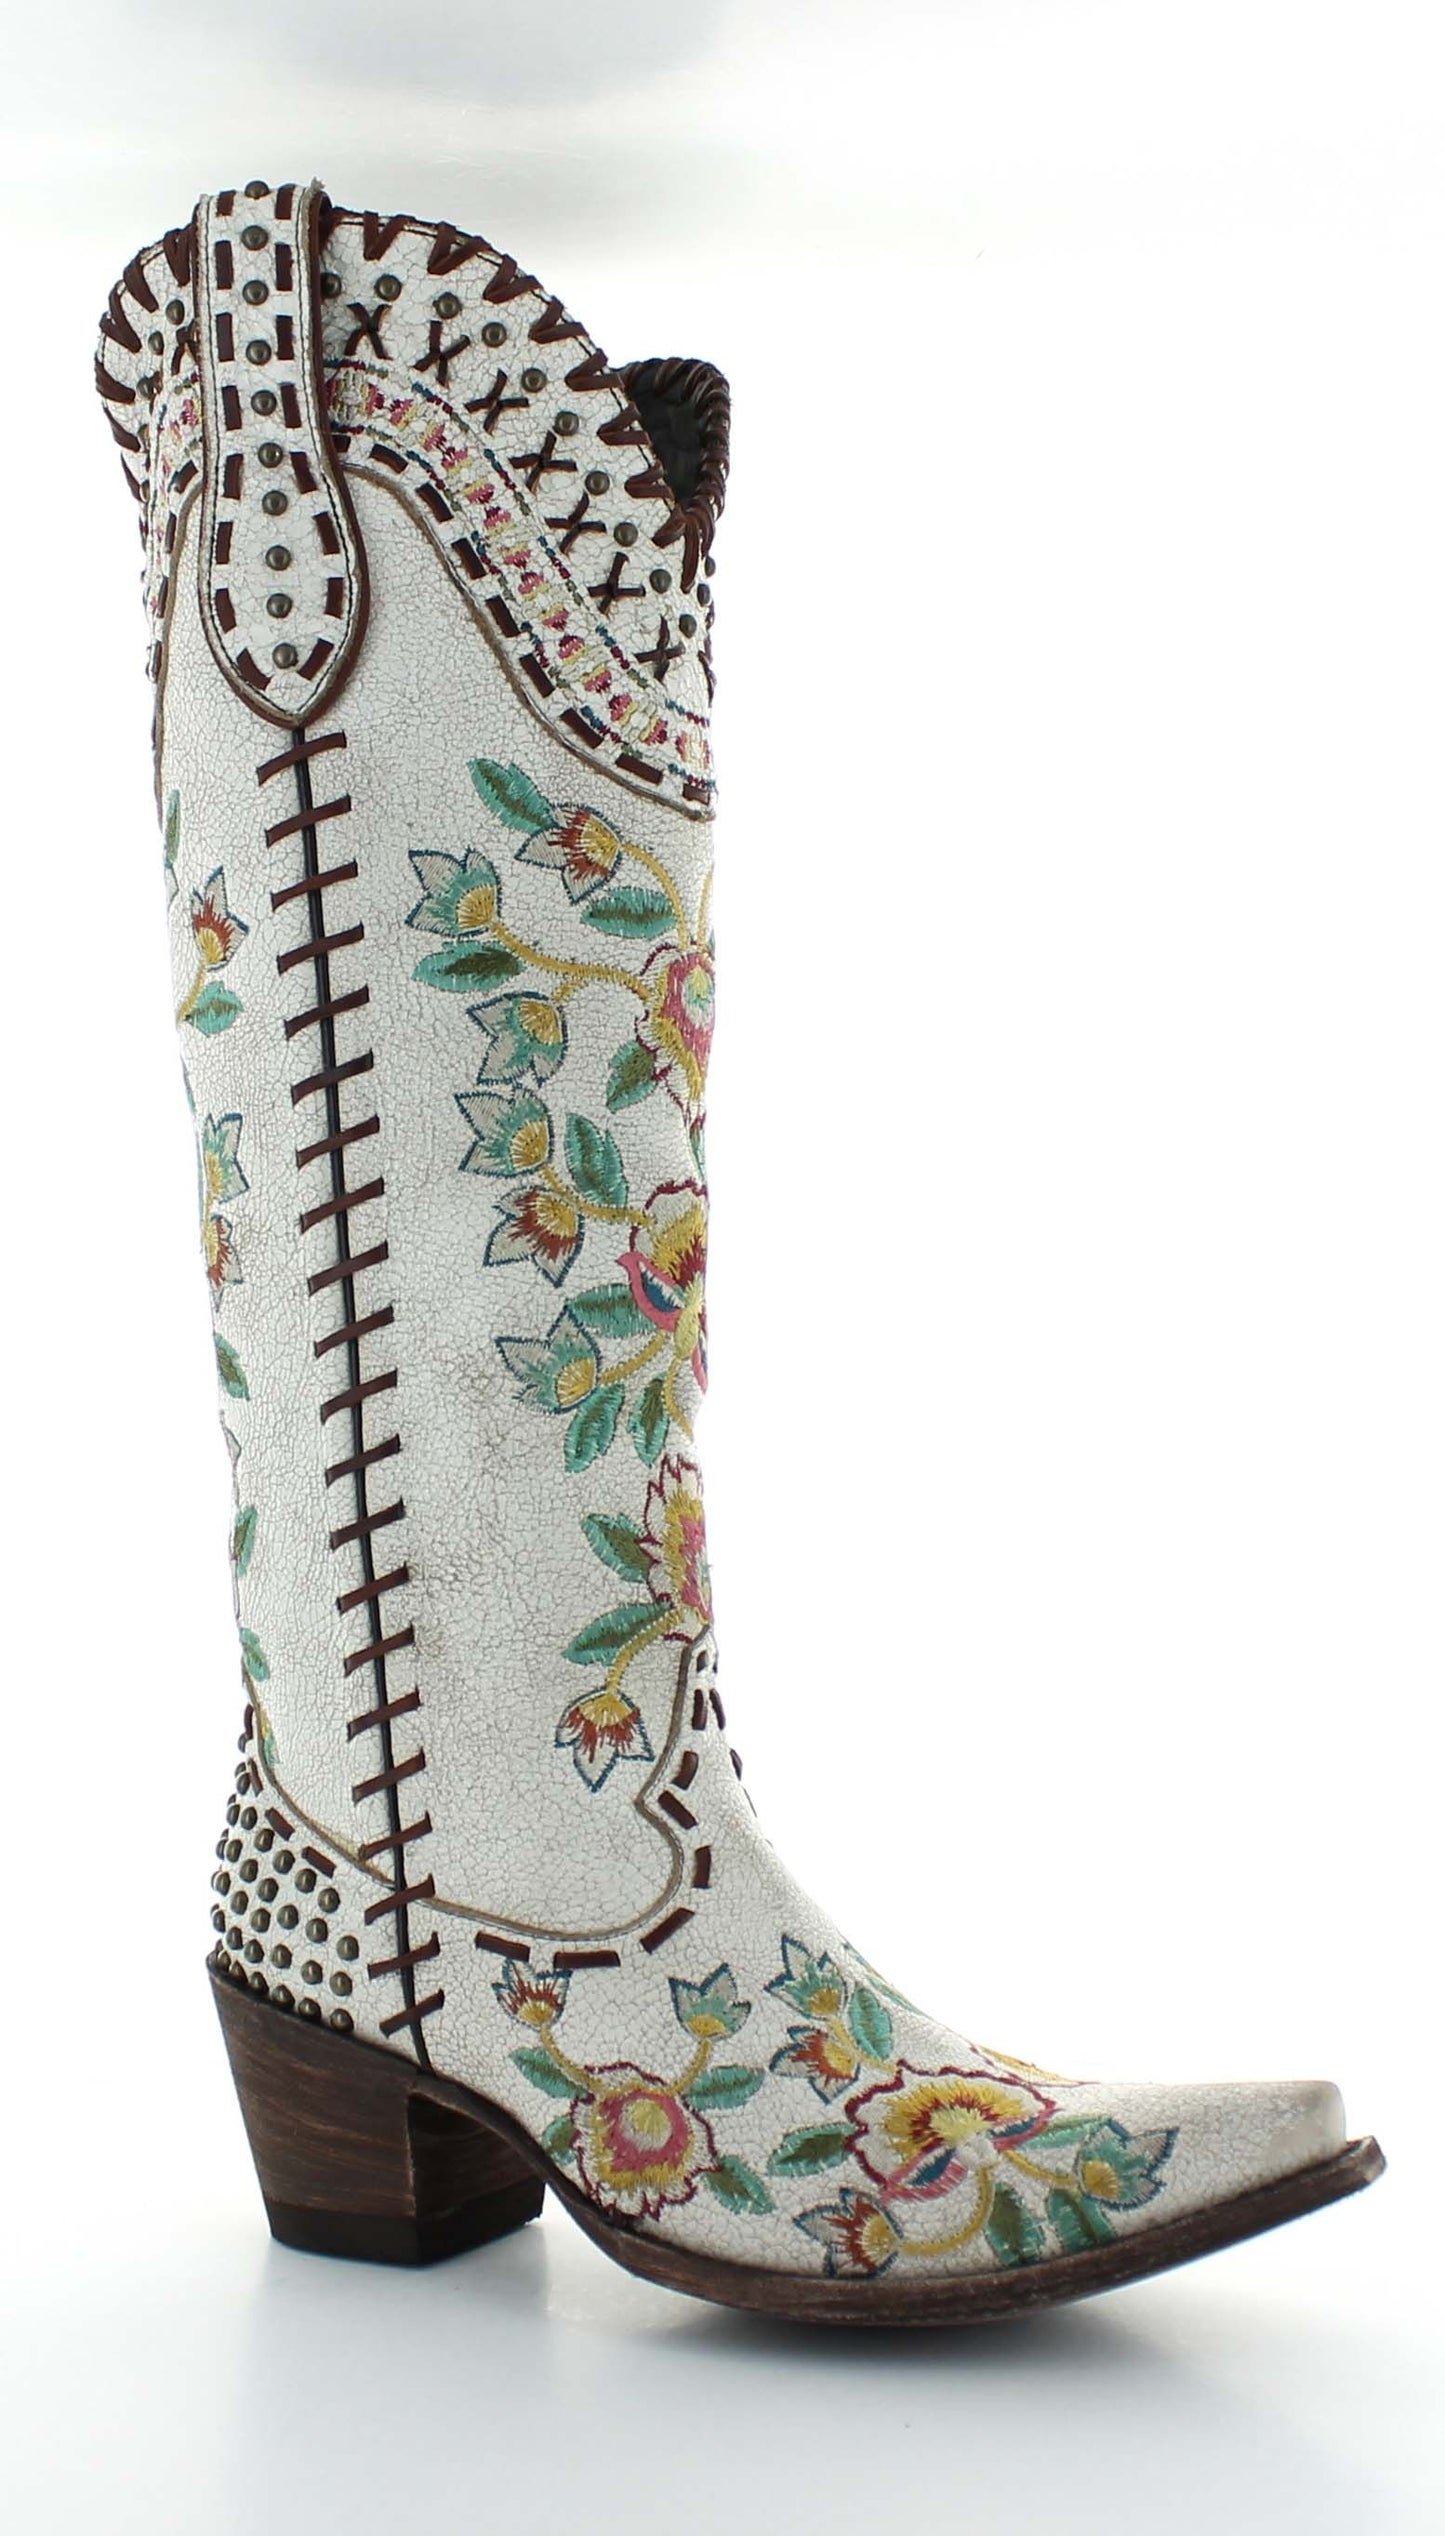 Double D Ranch Almost Famous Tall Cowboy Boot in White by Old Gringo at 6Whiskey